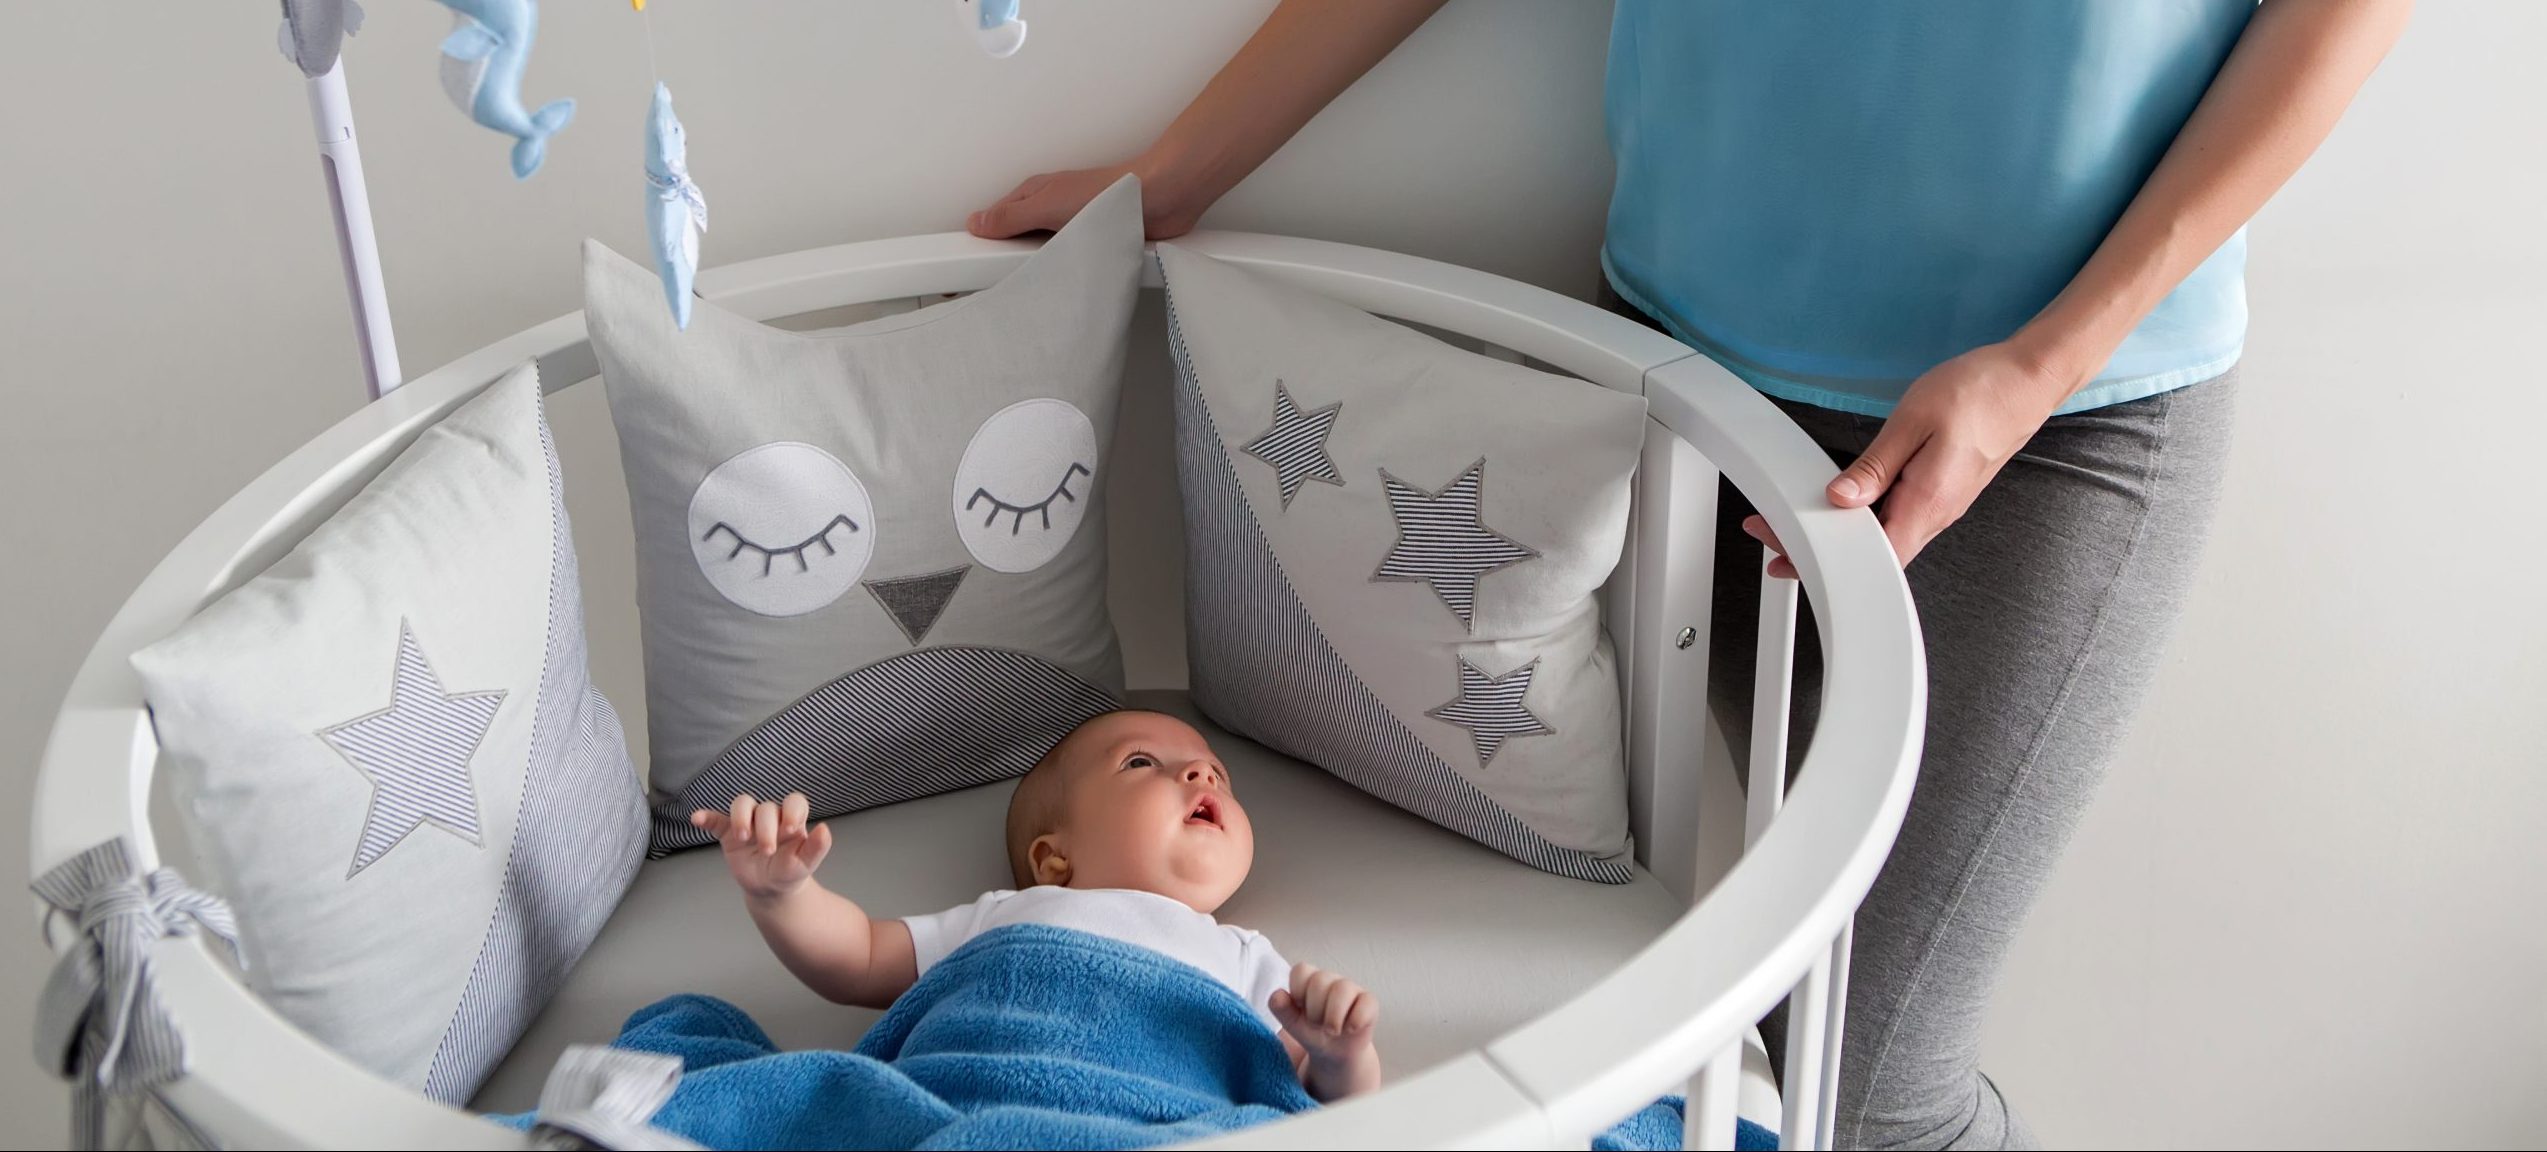 https://www.dontwasteyourmoney.com/wp-content/uploads/2020/07/best-bassinet-for-baby-scaled-e1596637888566.jpeg